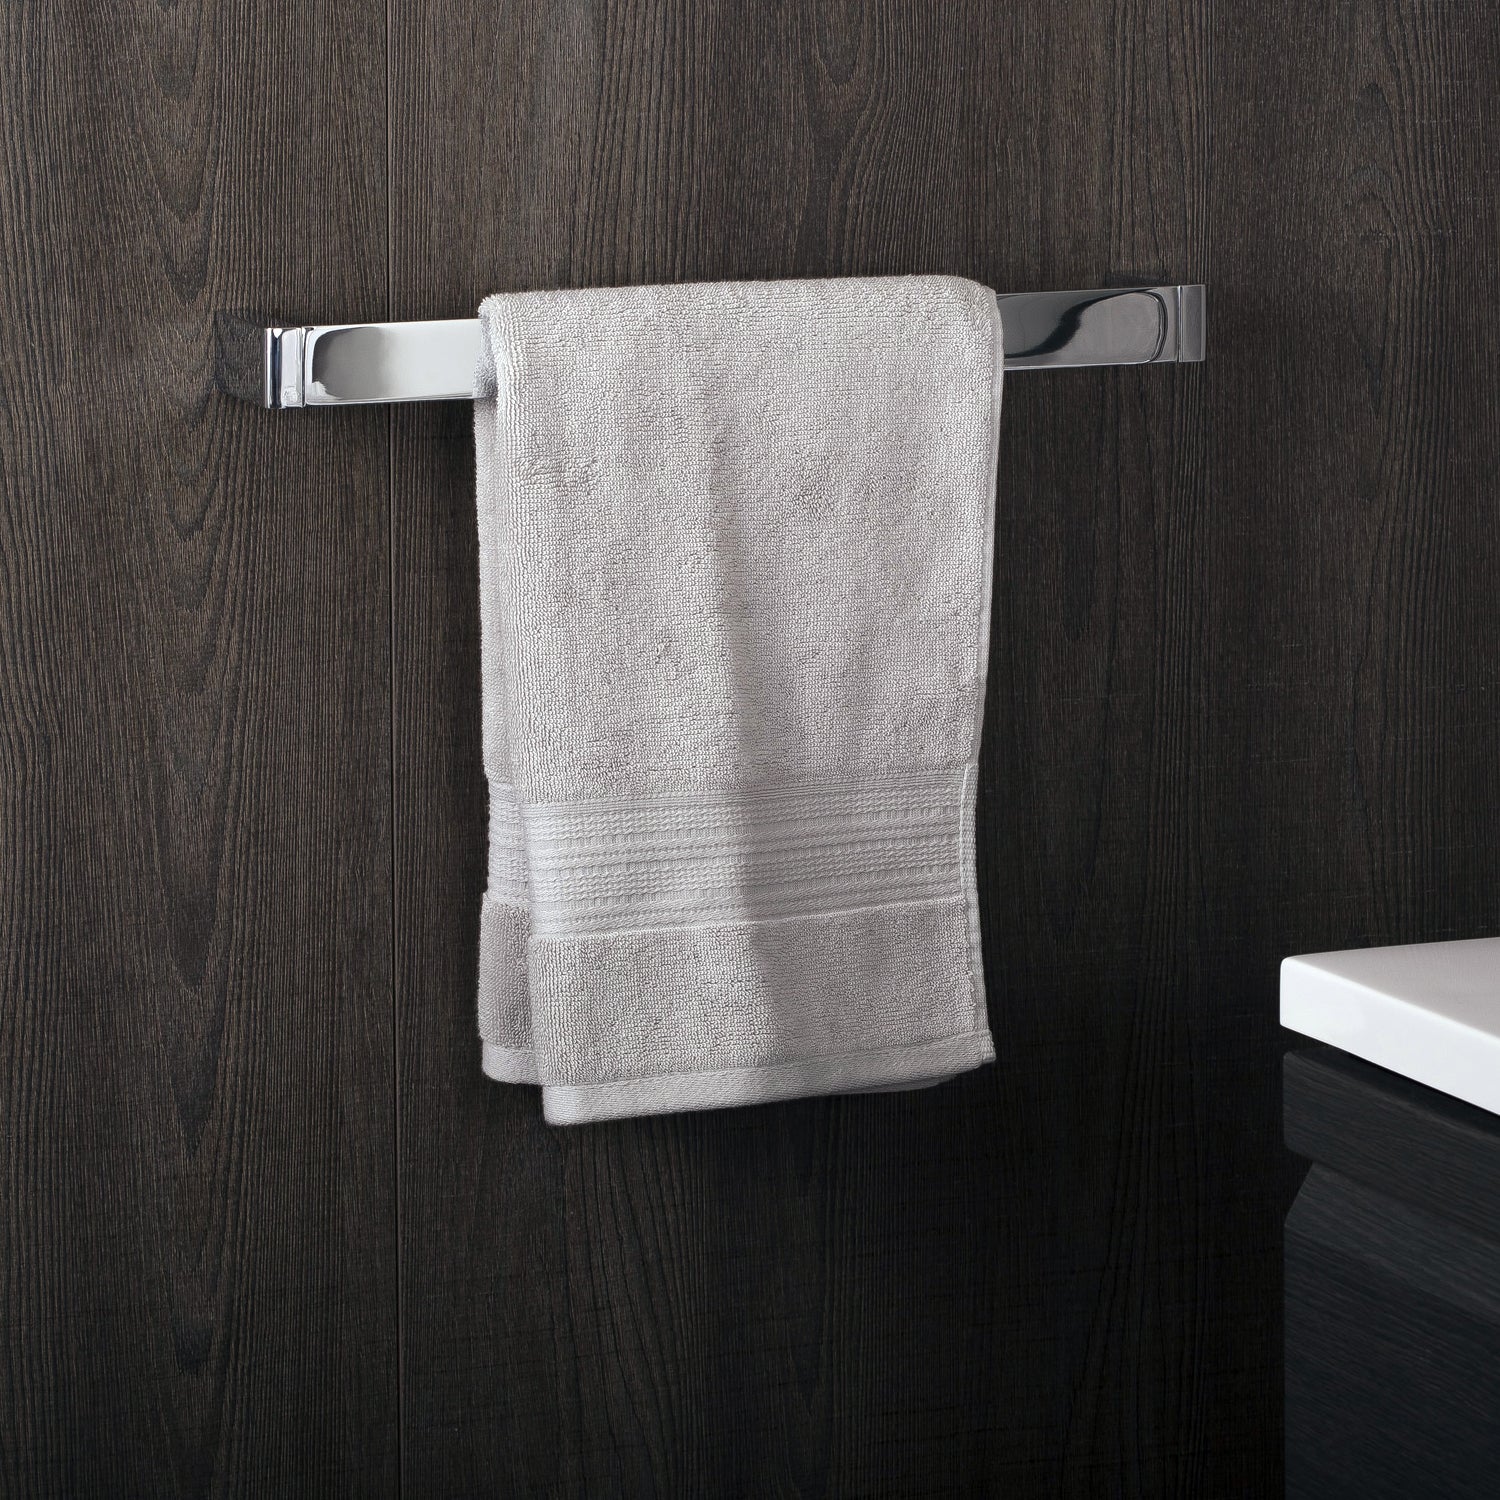 COSMIC Extreme Single Towel Bar, Wall Mount, Brass Body, Chrome Finish, 17-3/4 x 1-3/8 x 2-3/4 Inches (2530164)